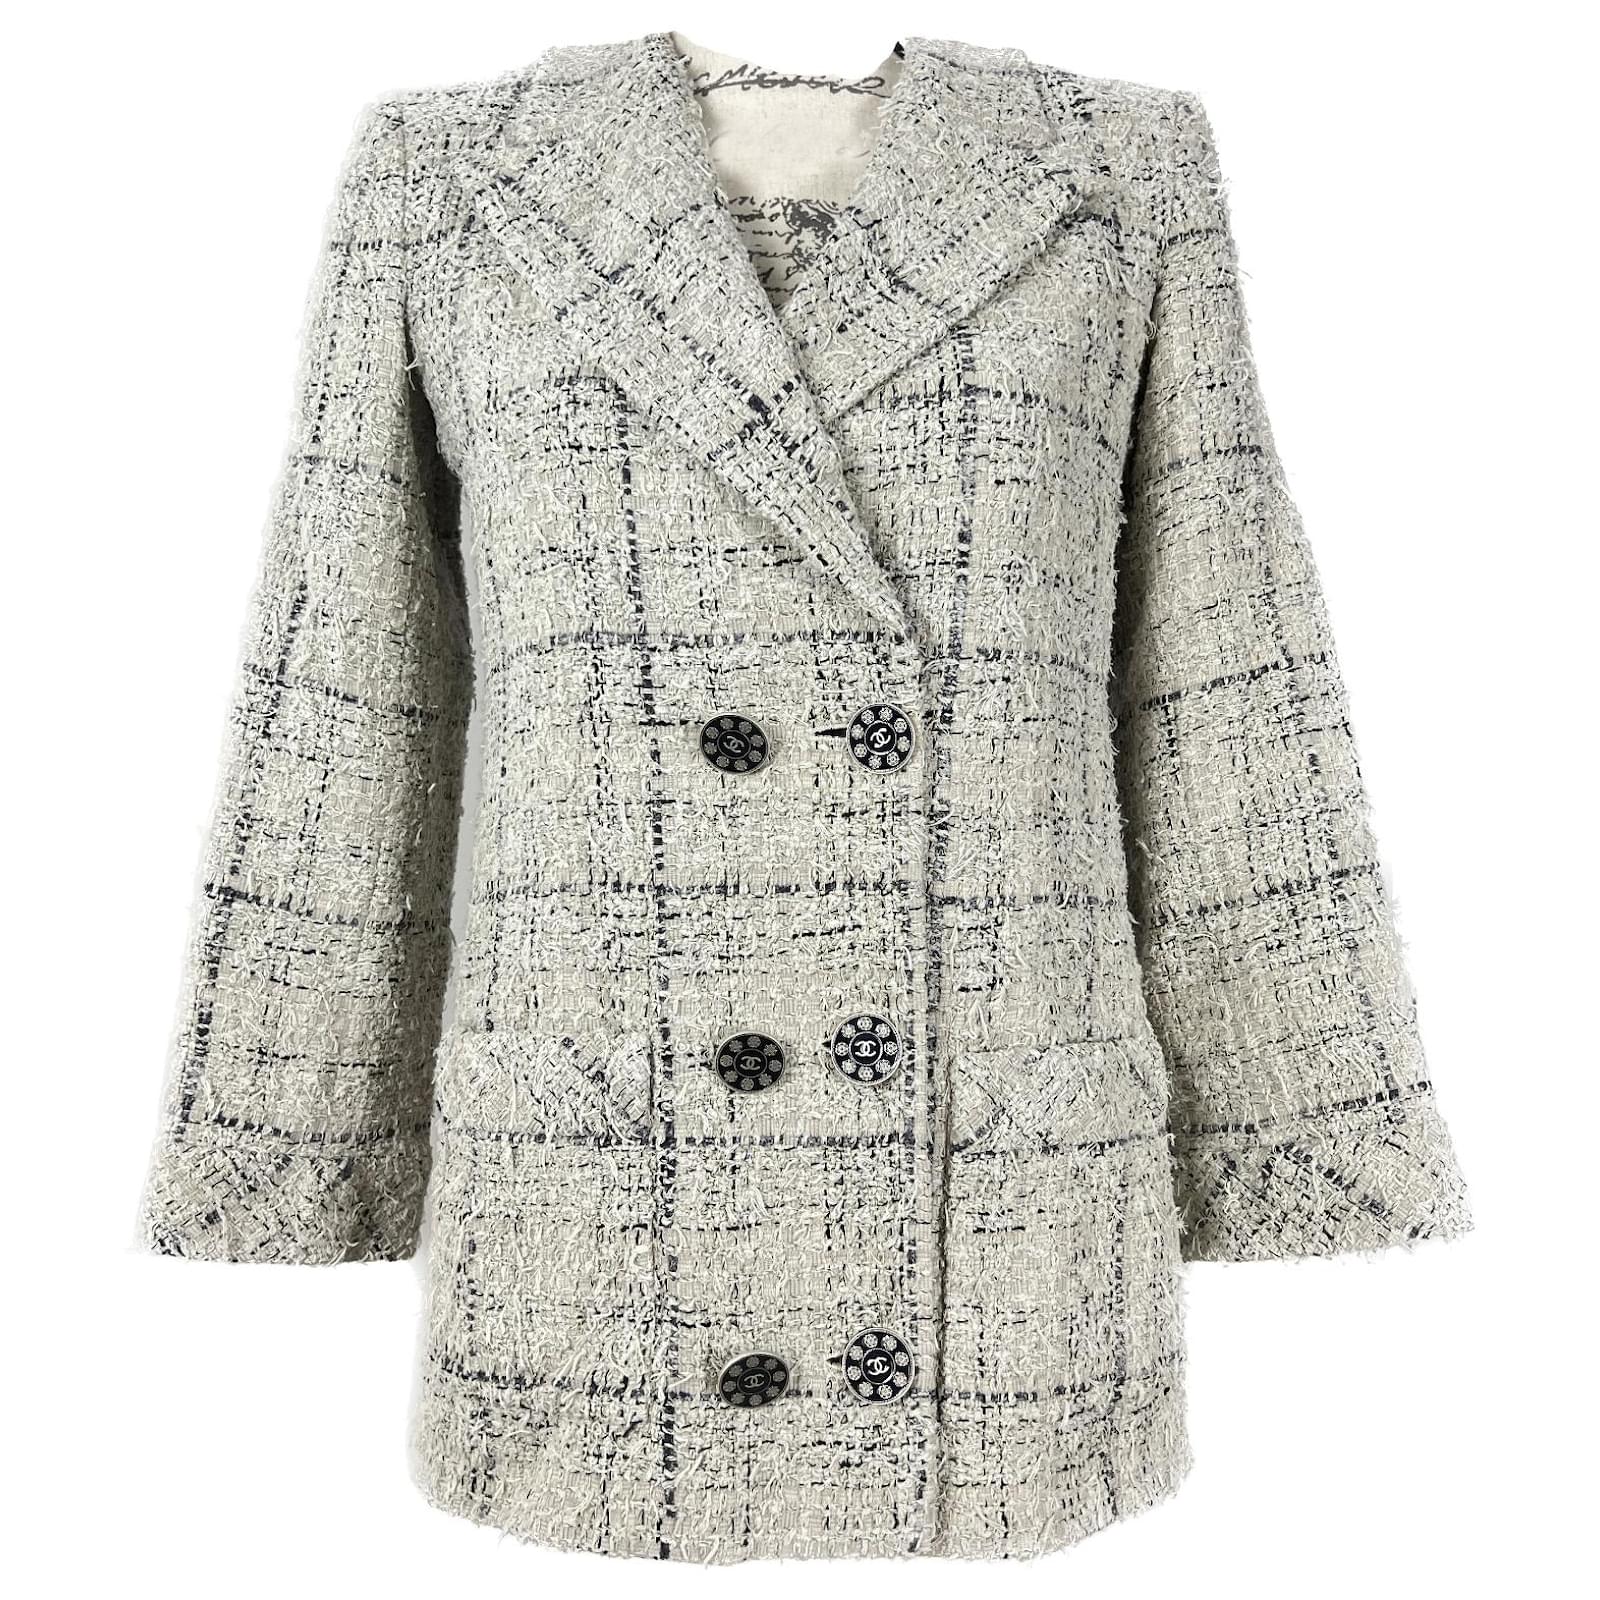 Pre-owned Chanel Lesage Tweed Jacket, Size 40